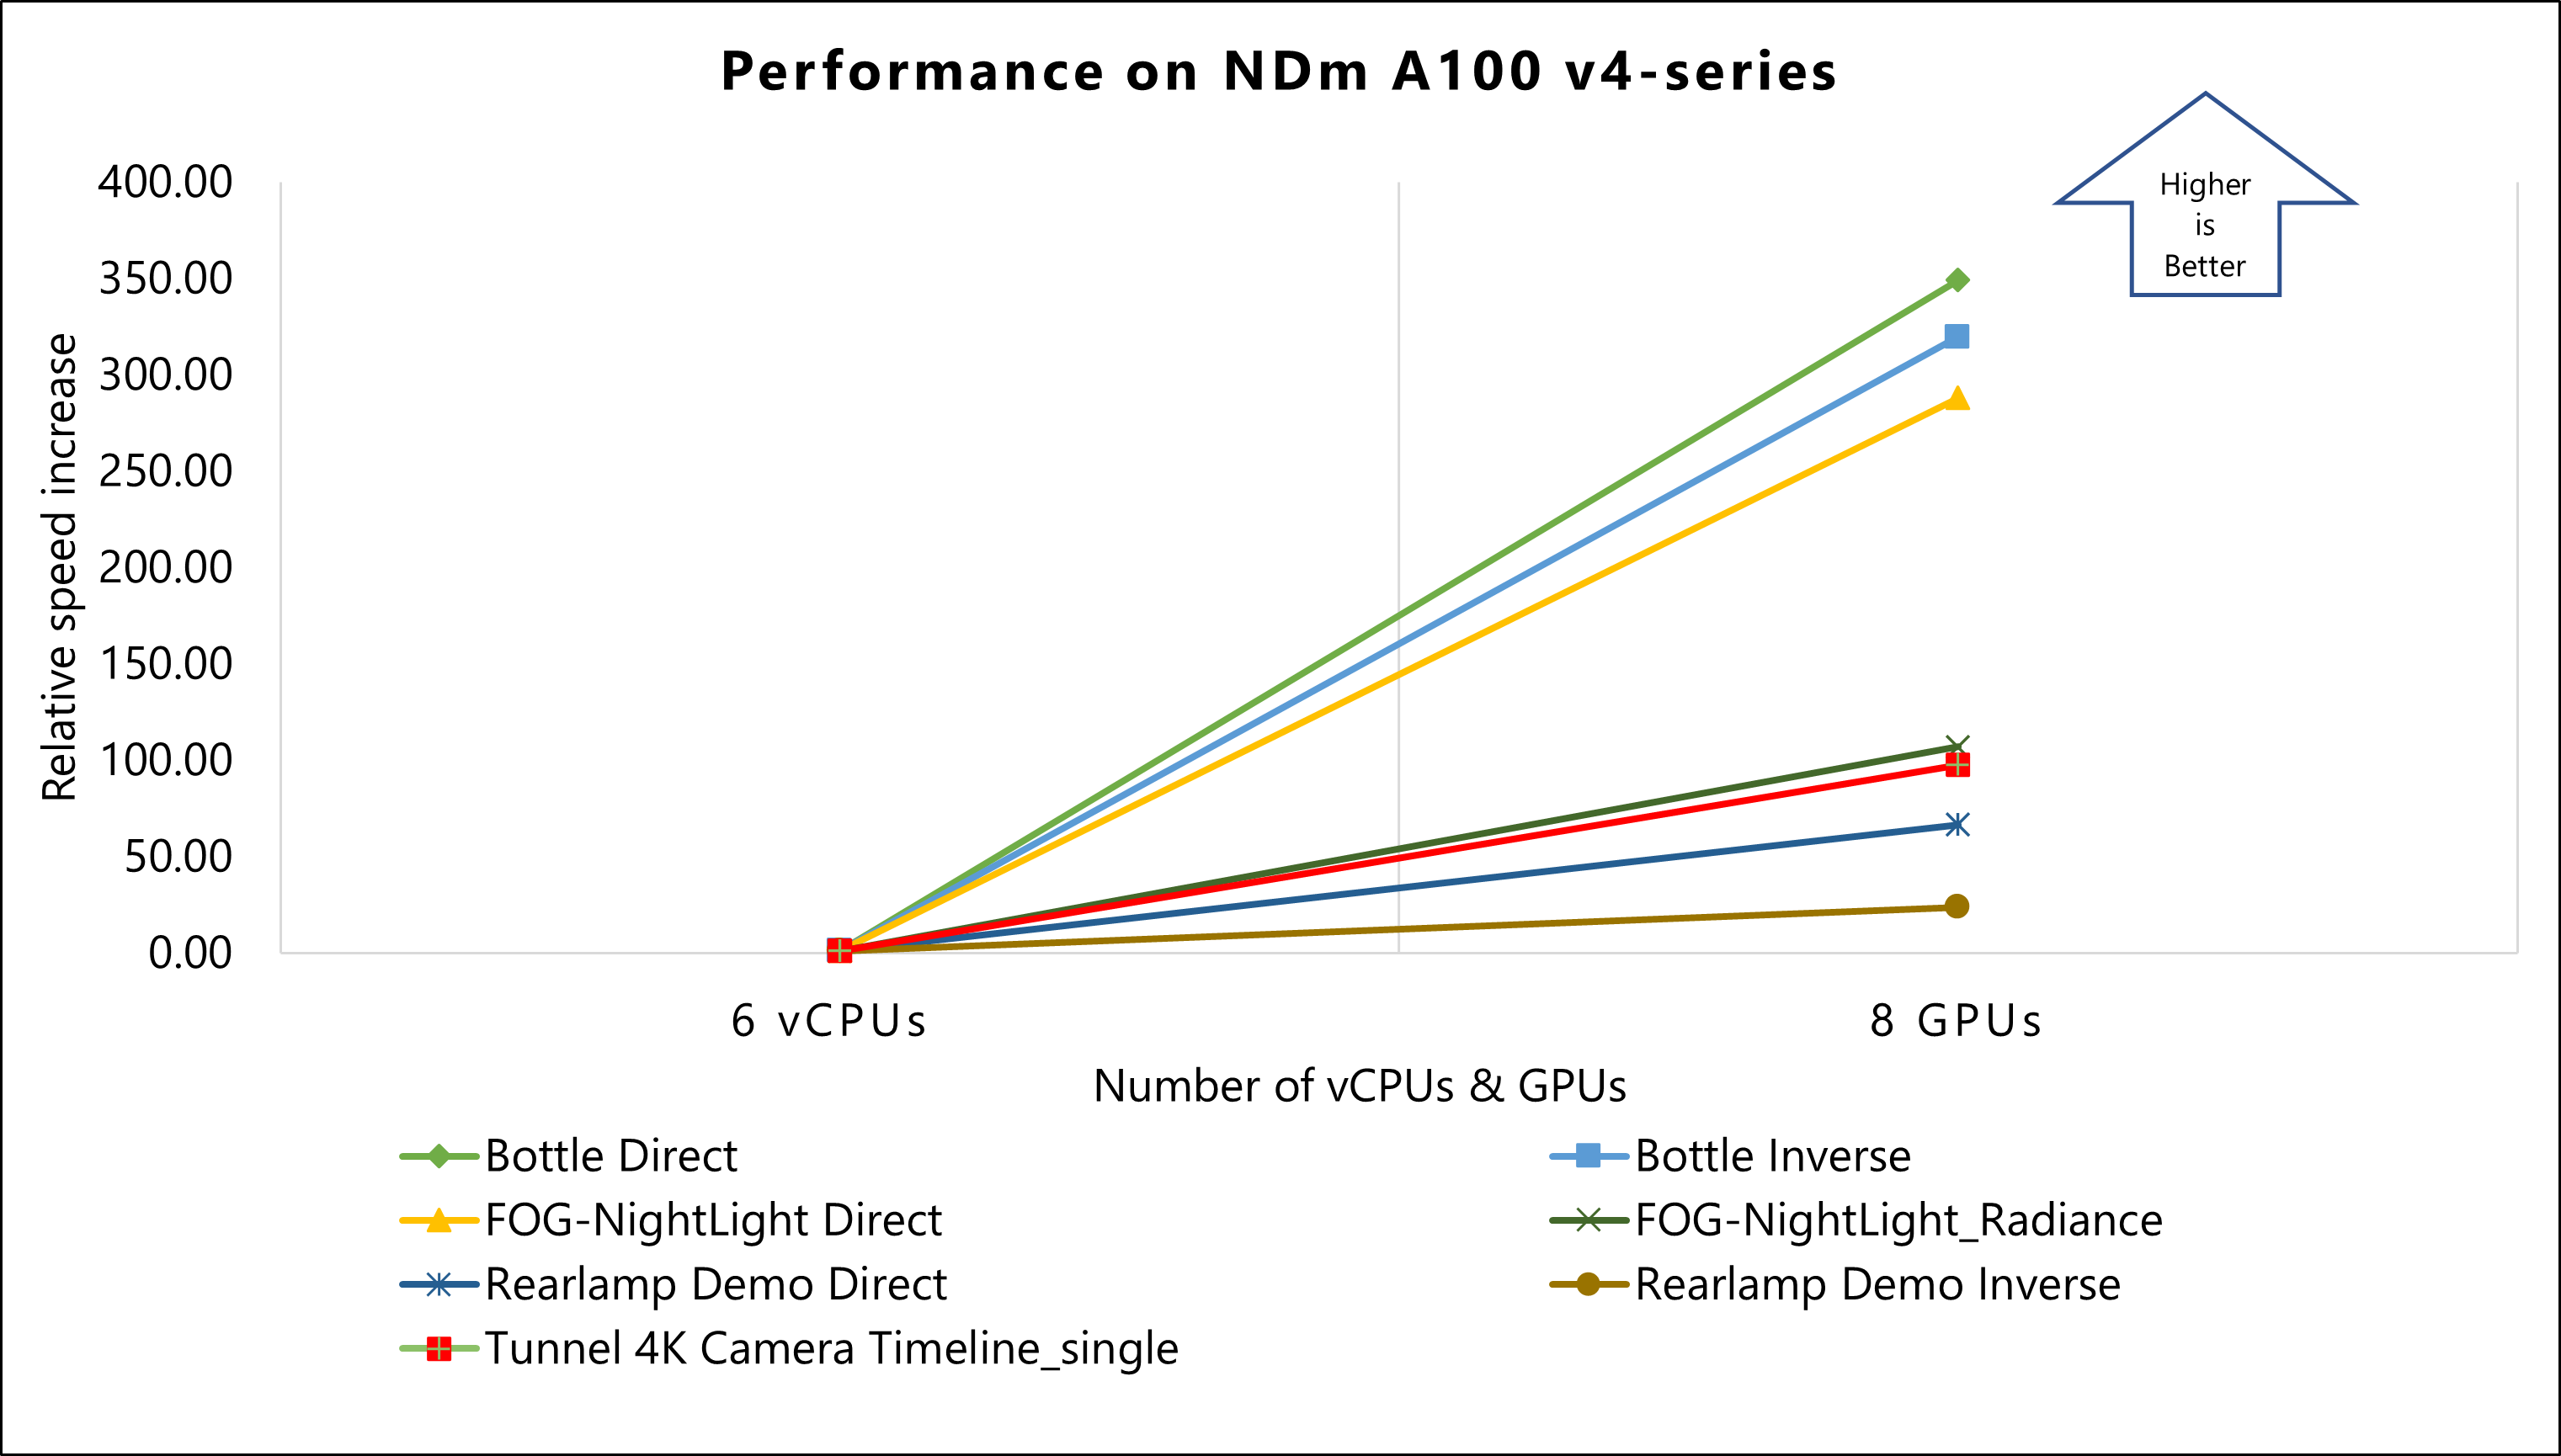 Graph showing relative speed increase of models on NDm A100 v4-series VM.